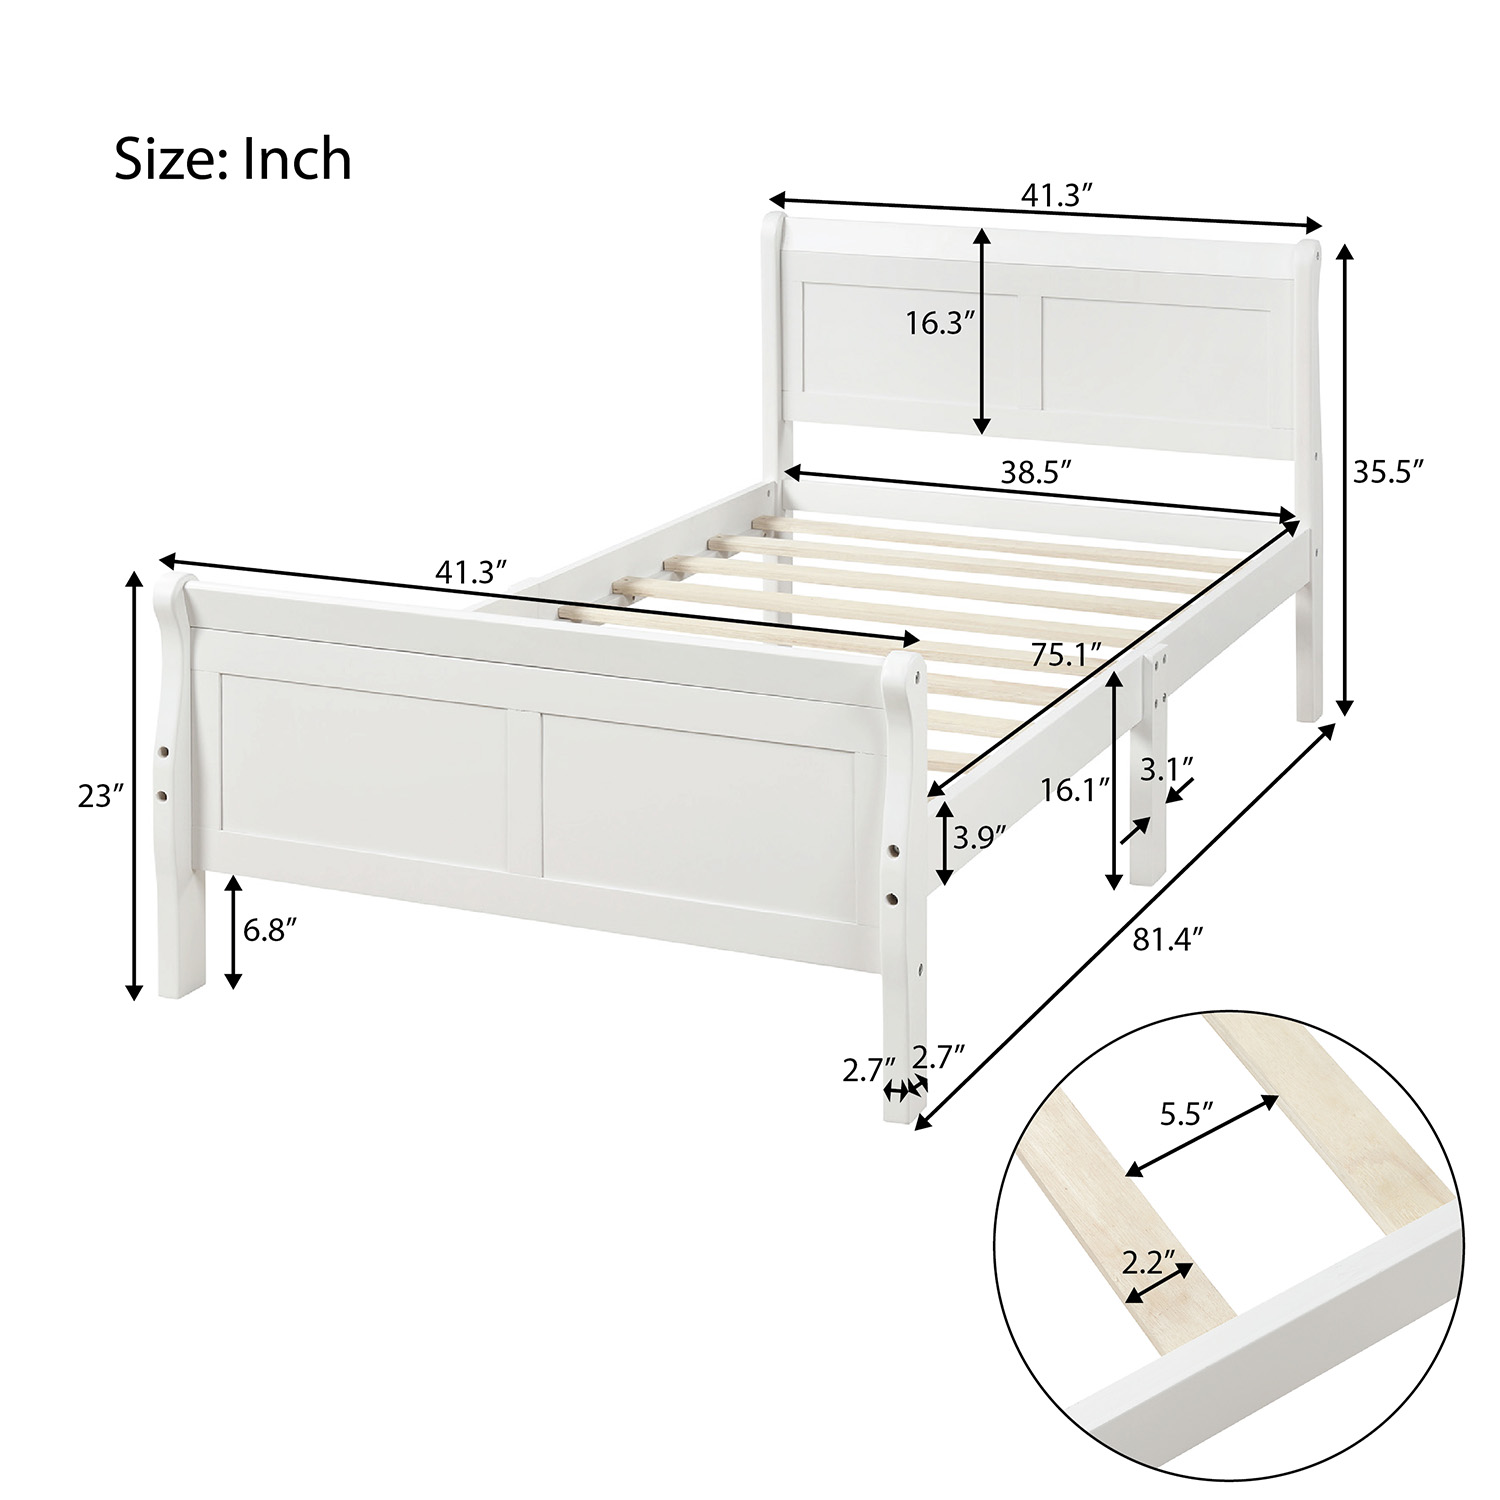 Twin Bed Frame No Box Spring Needed, Wood Platform Bed Frame with Headboard and Footboard, Strong Wooden Slats, Twin Bed Frames for Kids, Adults, Modern Bedroom Furniture, White, W9772 - image 5 of 8